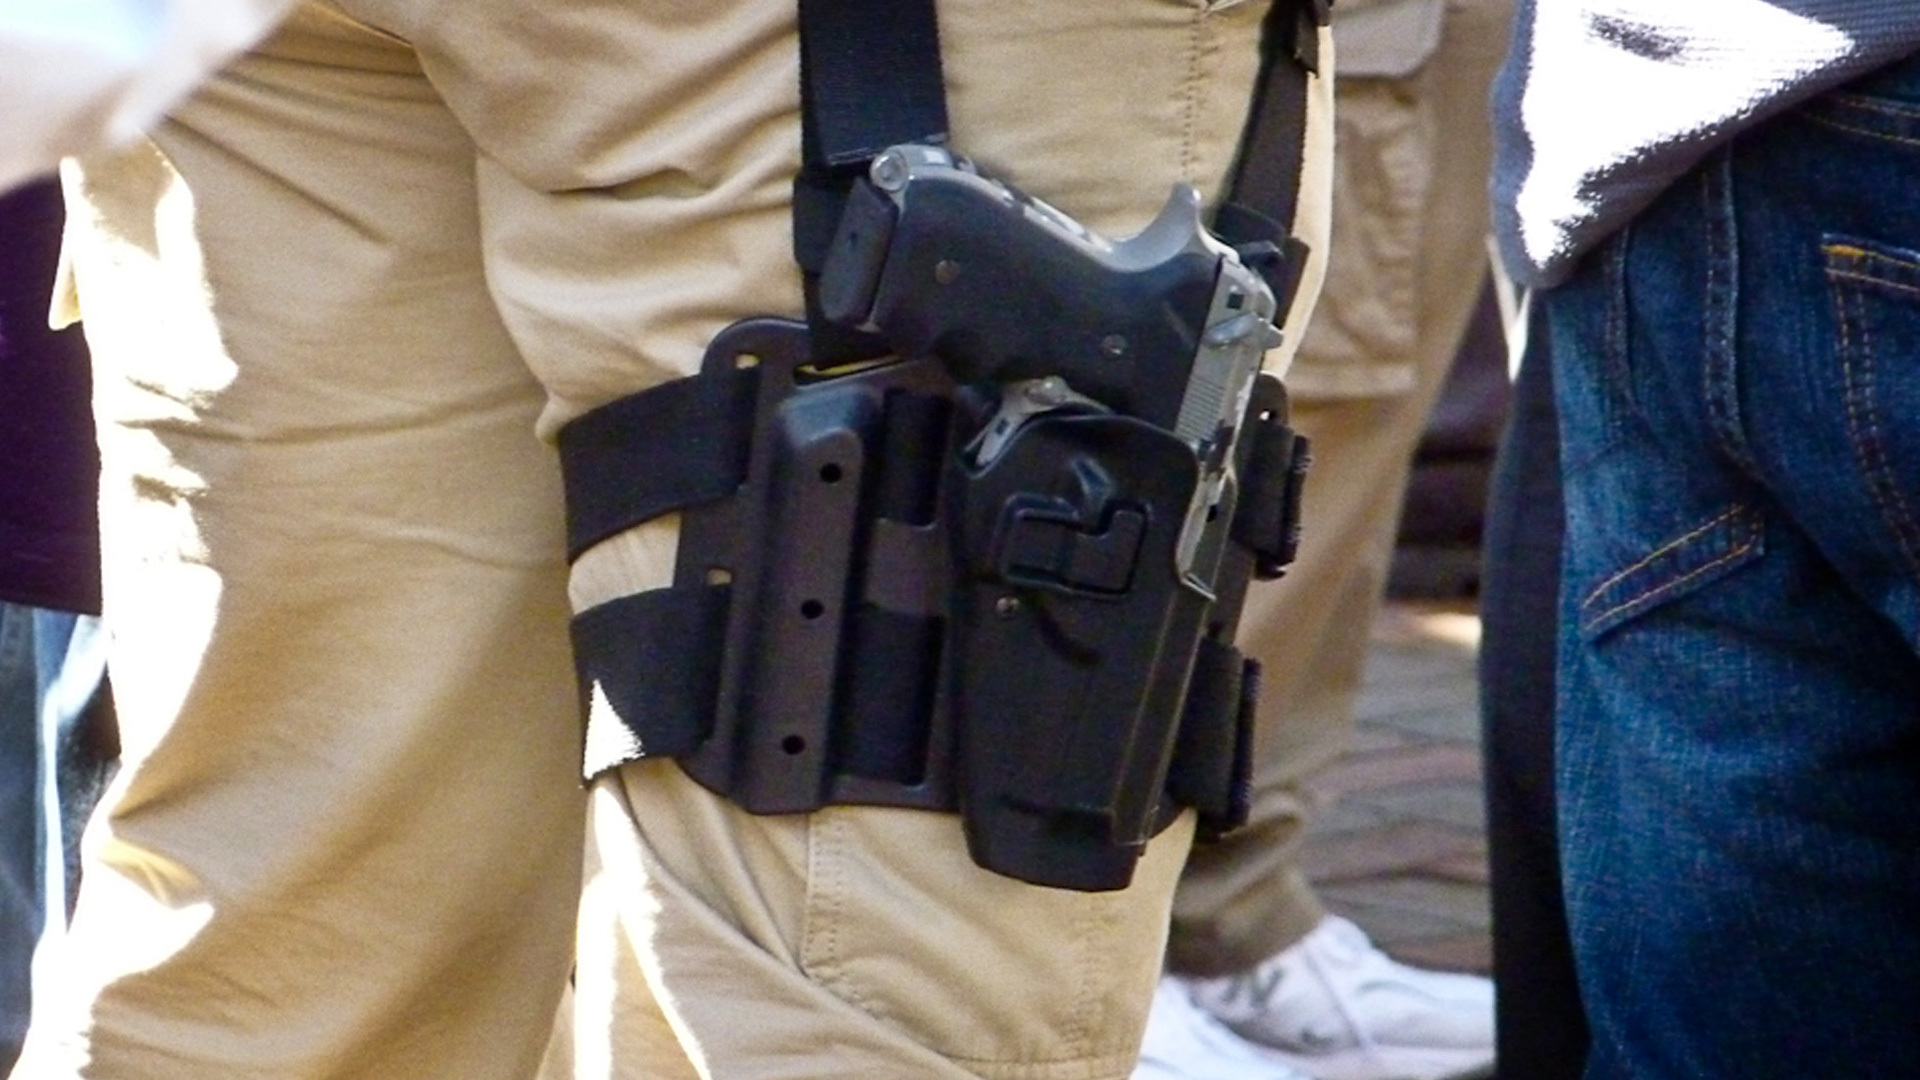 Open Carry Is A Deterrent… Or Is It?